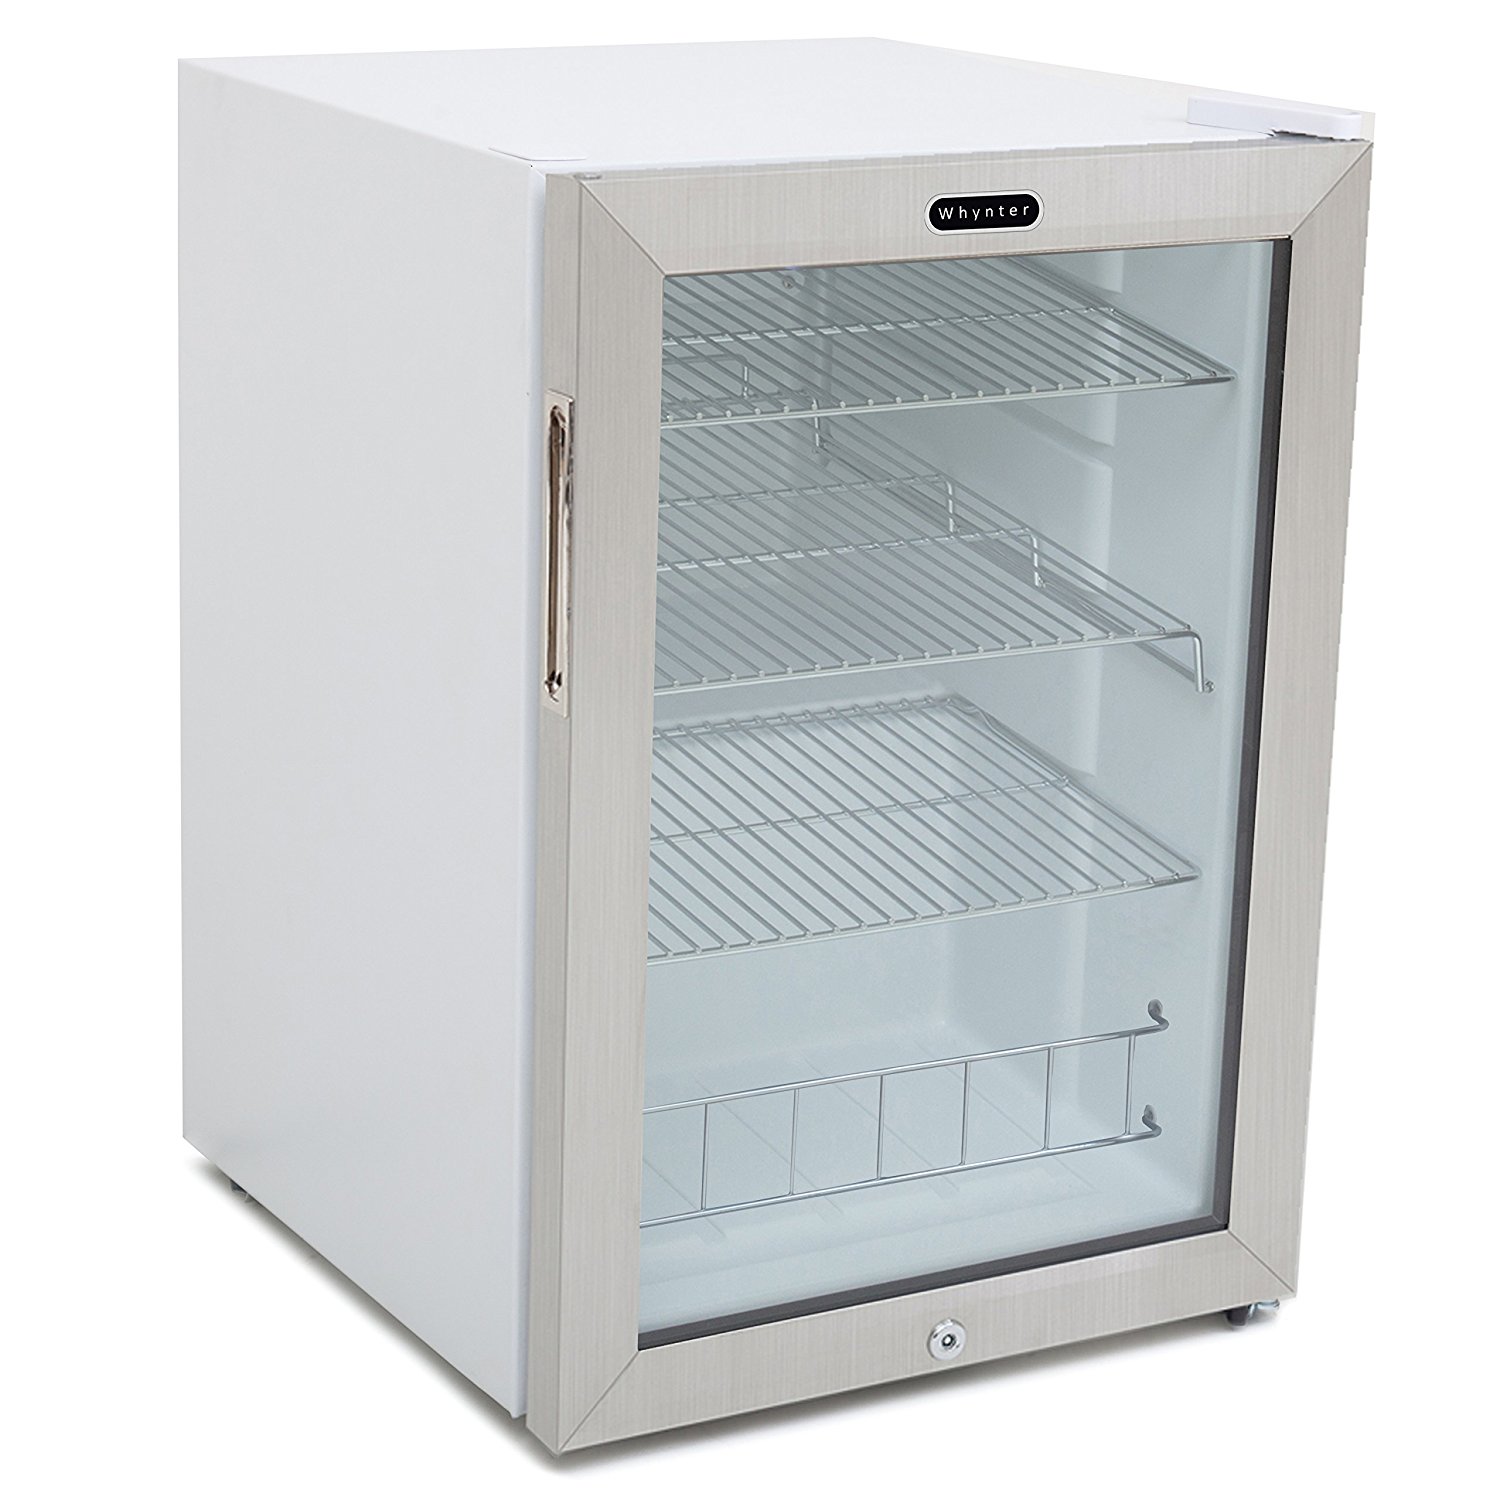 Whynter BR-091WS Beverage Refrigerator with Lock, 90 Can Capacity, Stainless Steel